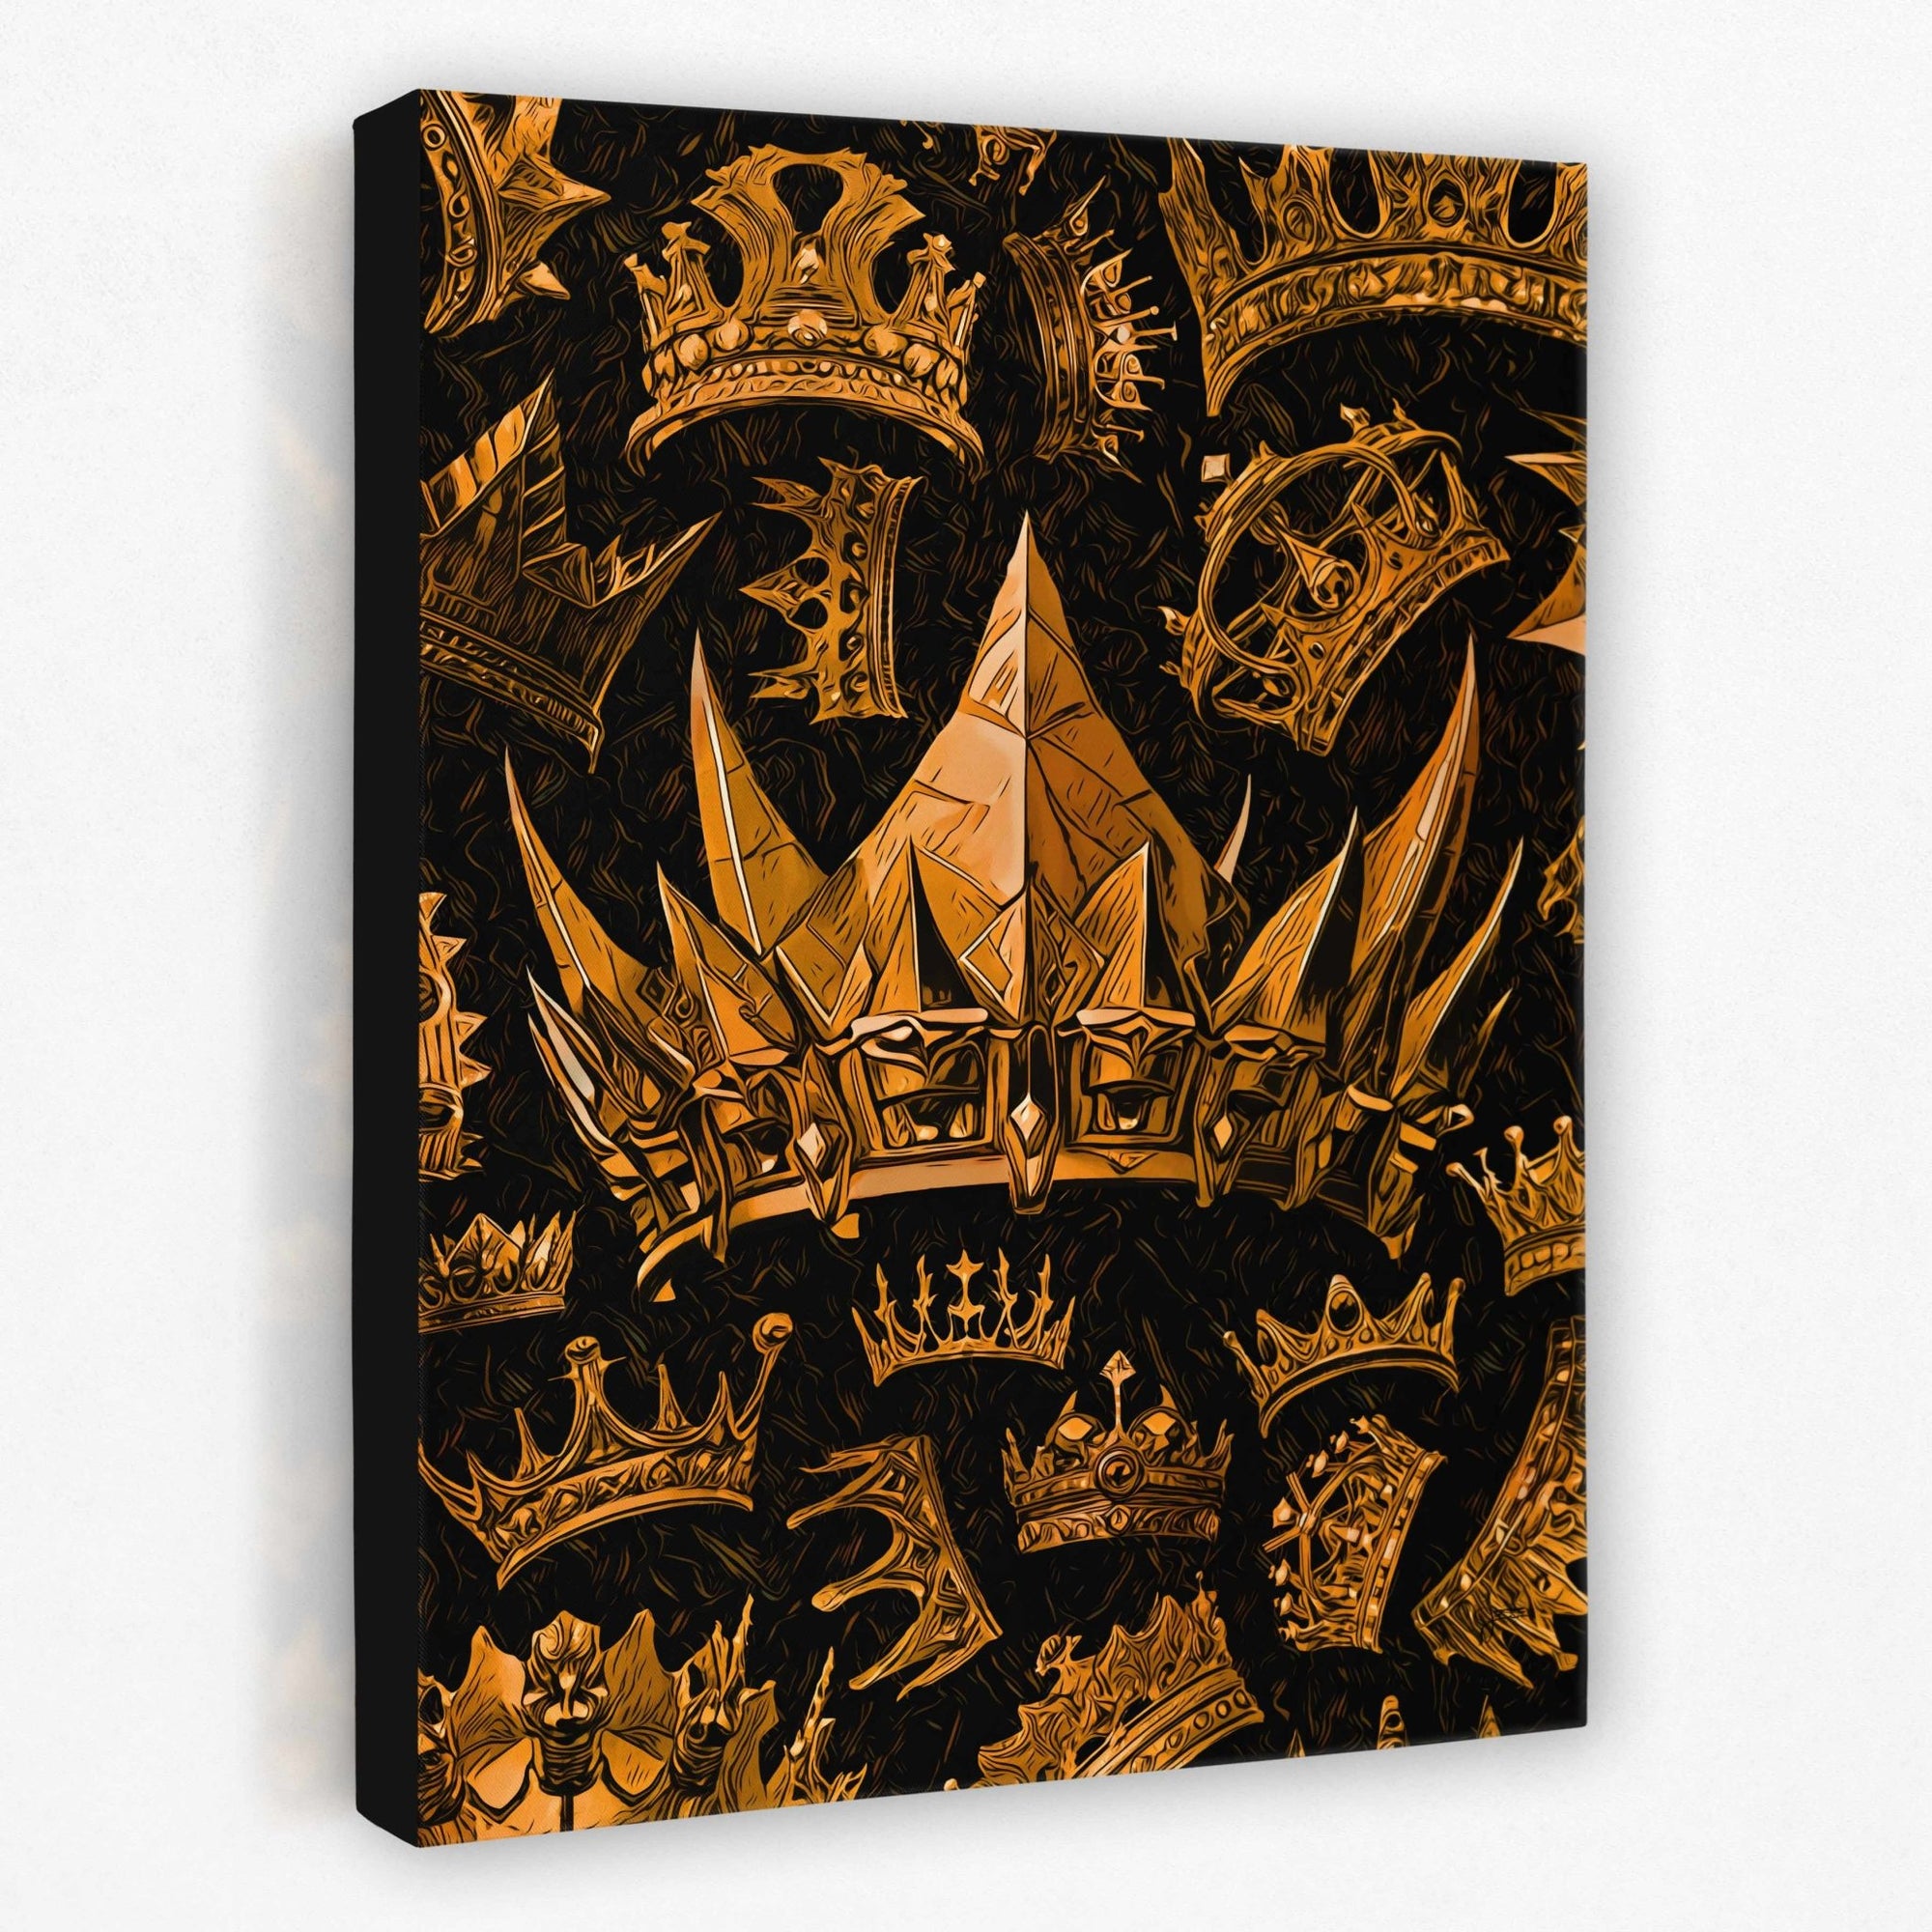 Gold Crowns - Thedopeart Canvas